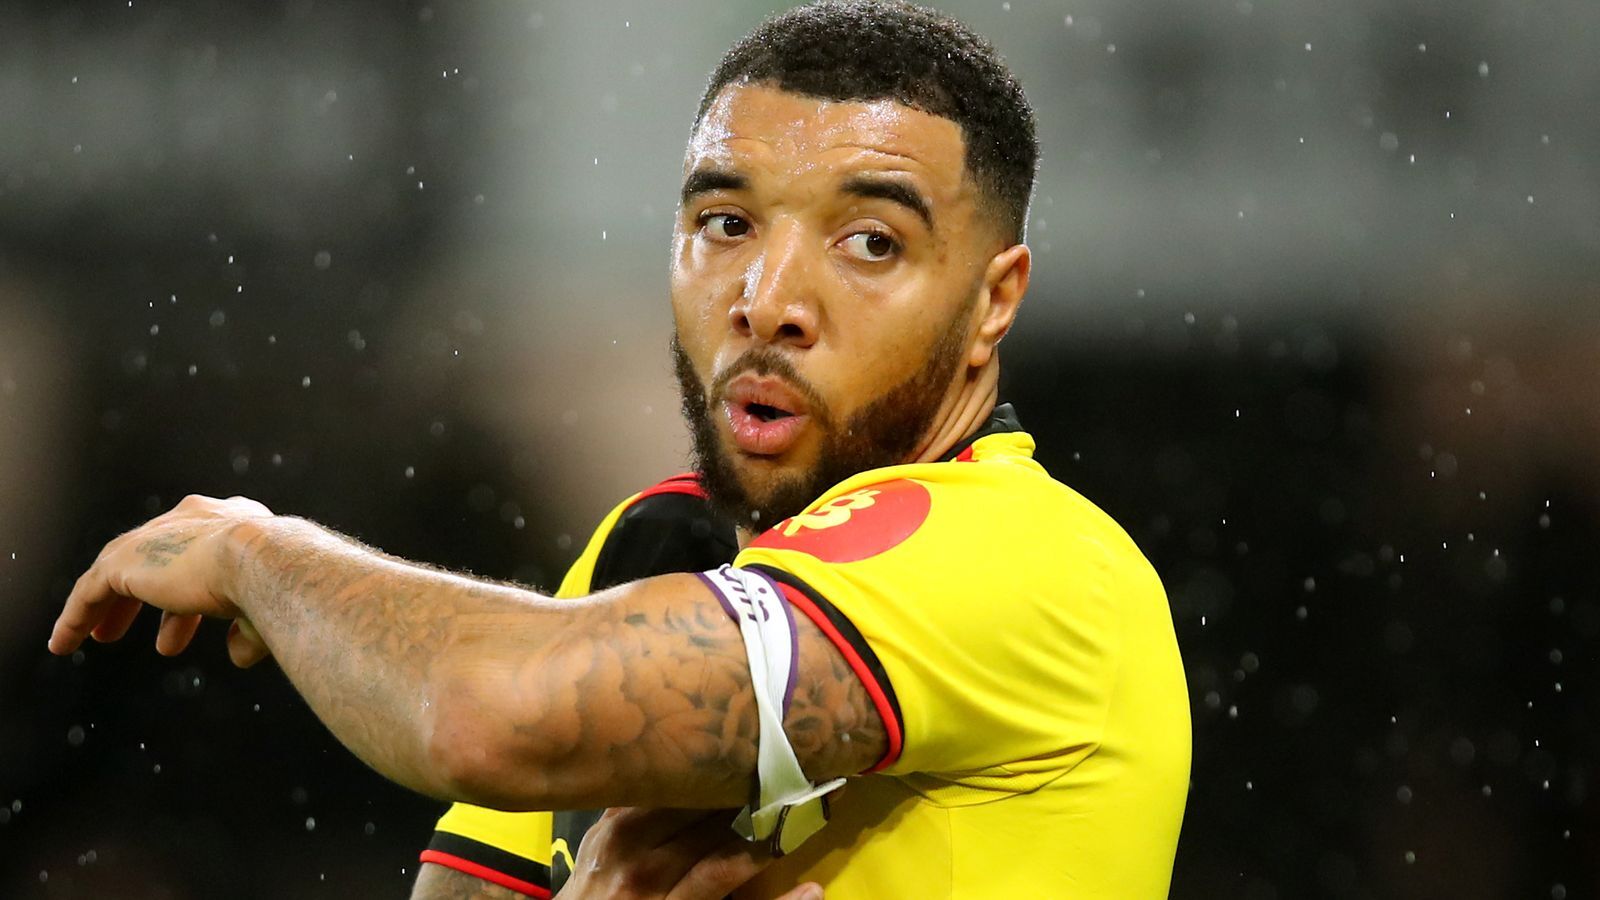 Watford Wins 2-1 over Newcastle United at Their Local Vicarage Lane